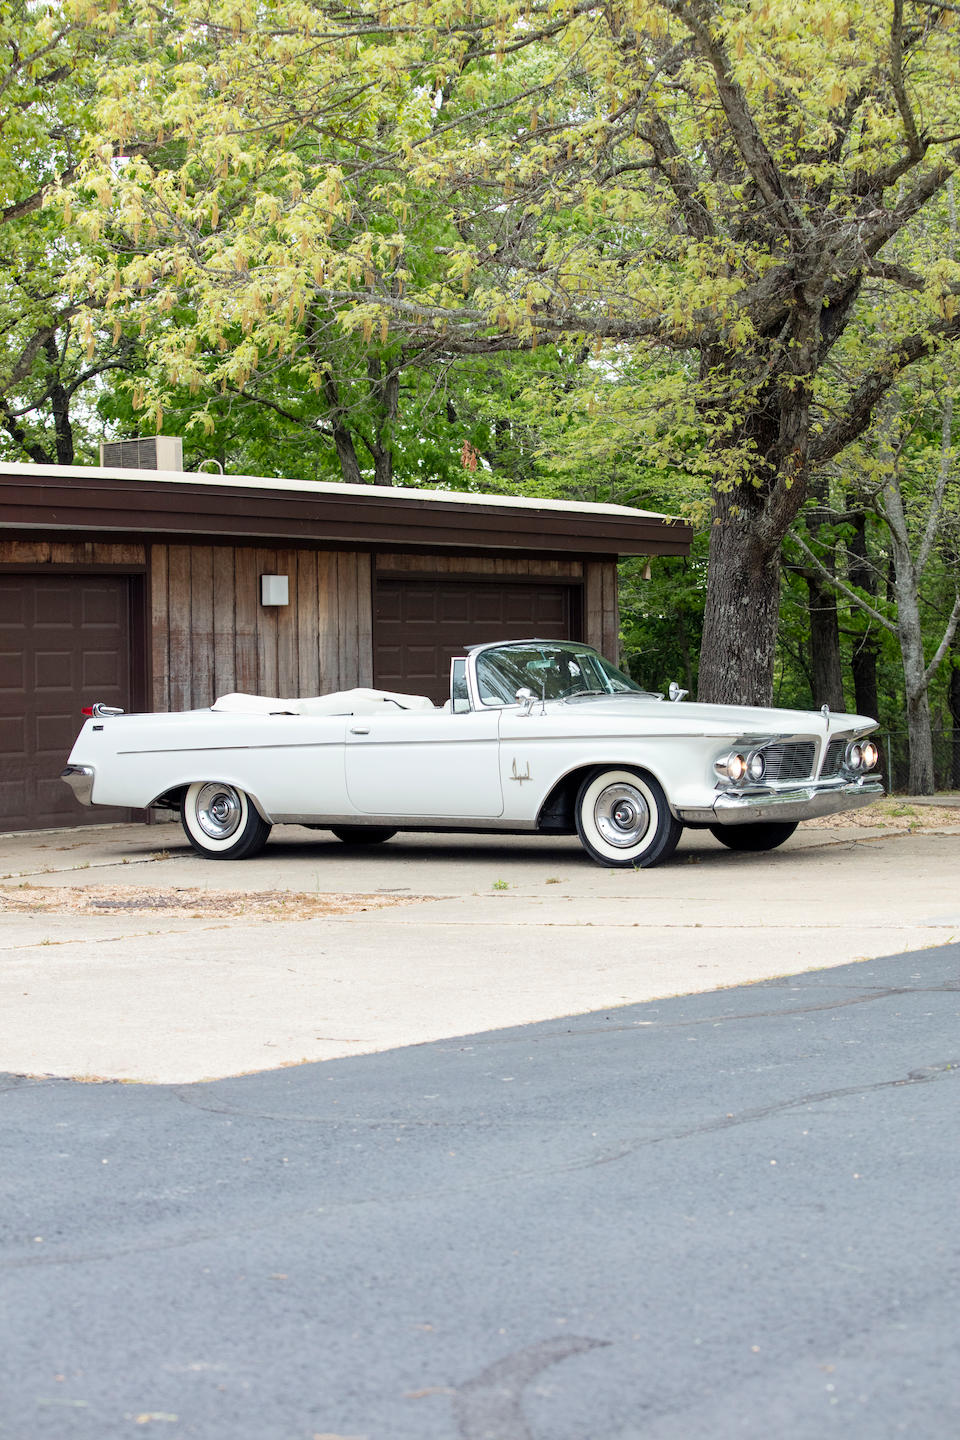 <B>1962 IMPERIAL CROWN IMPERIAL CONVERTIBLE<br /></B><BR />Chassis no. 9223176860